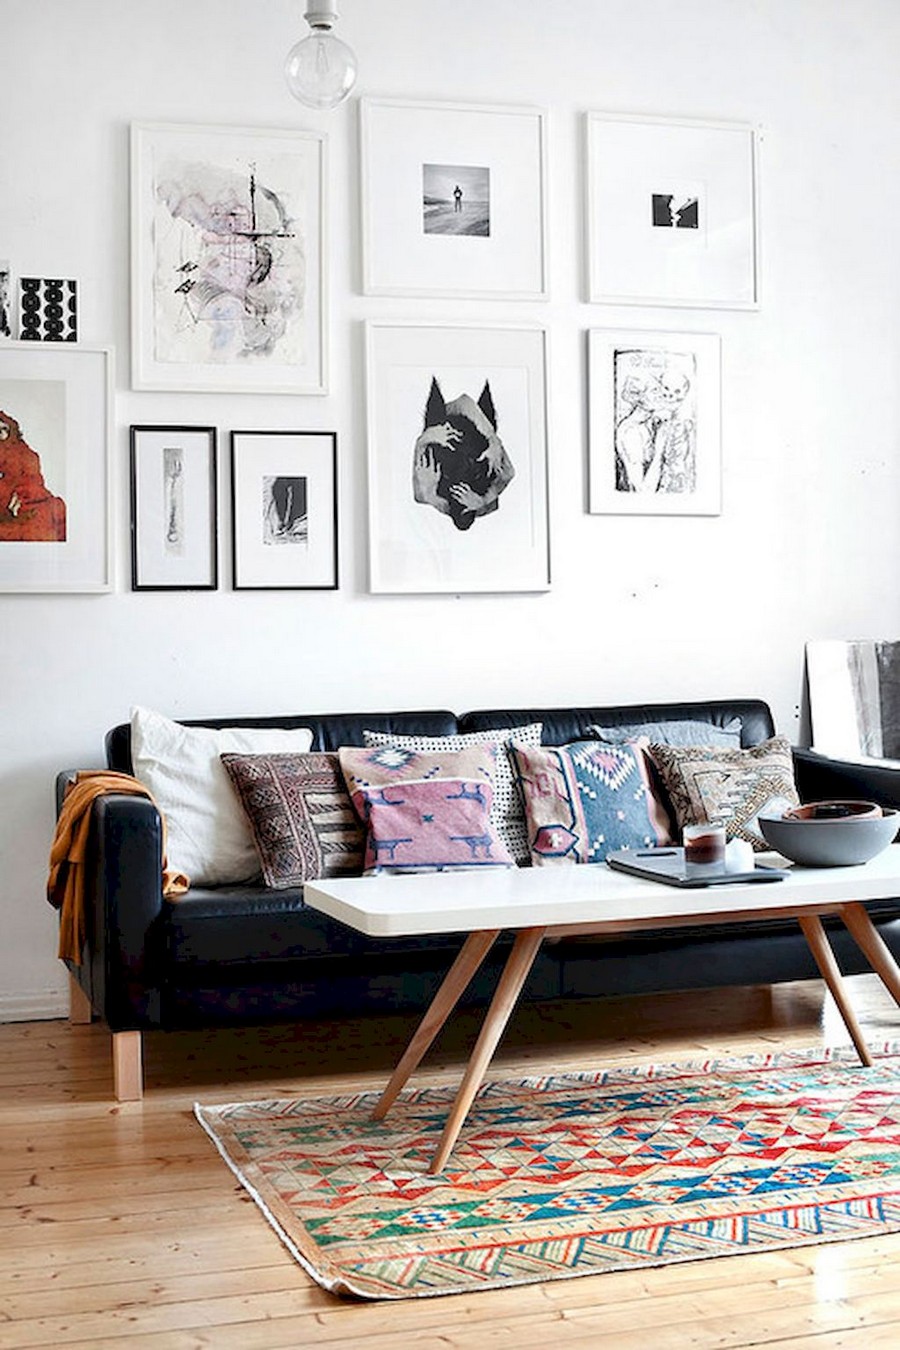 5 Black Leather Sofas Perfect For Your Living Room Decor